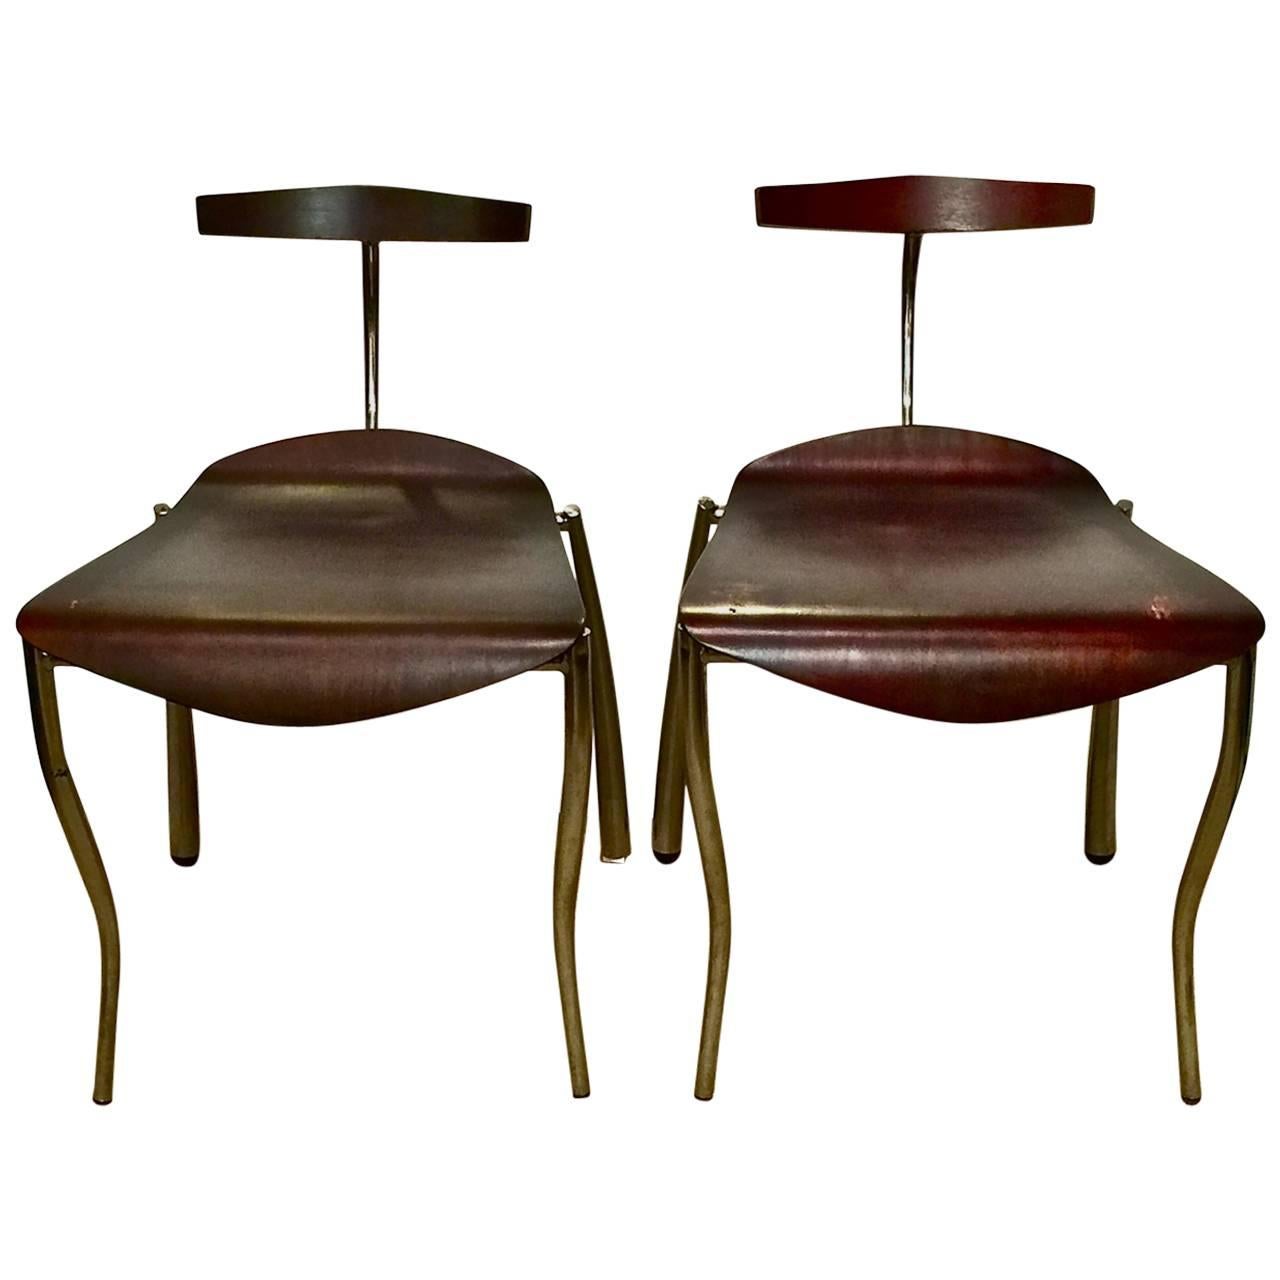 Pair of Memphis Attributed to Prototype Chairs